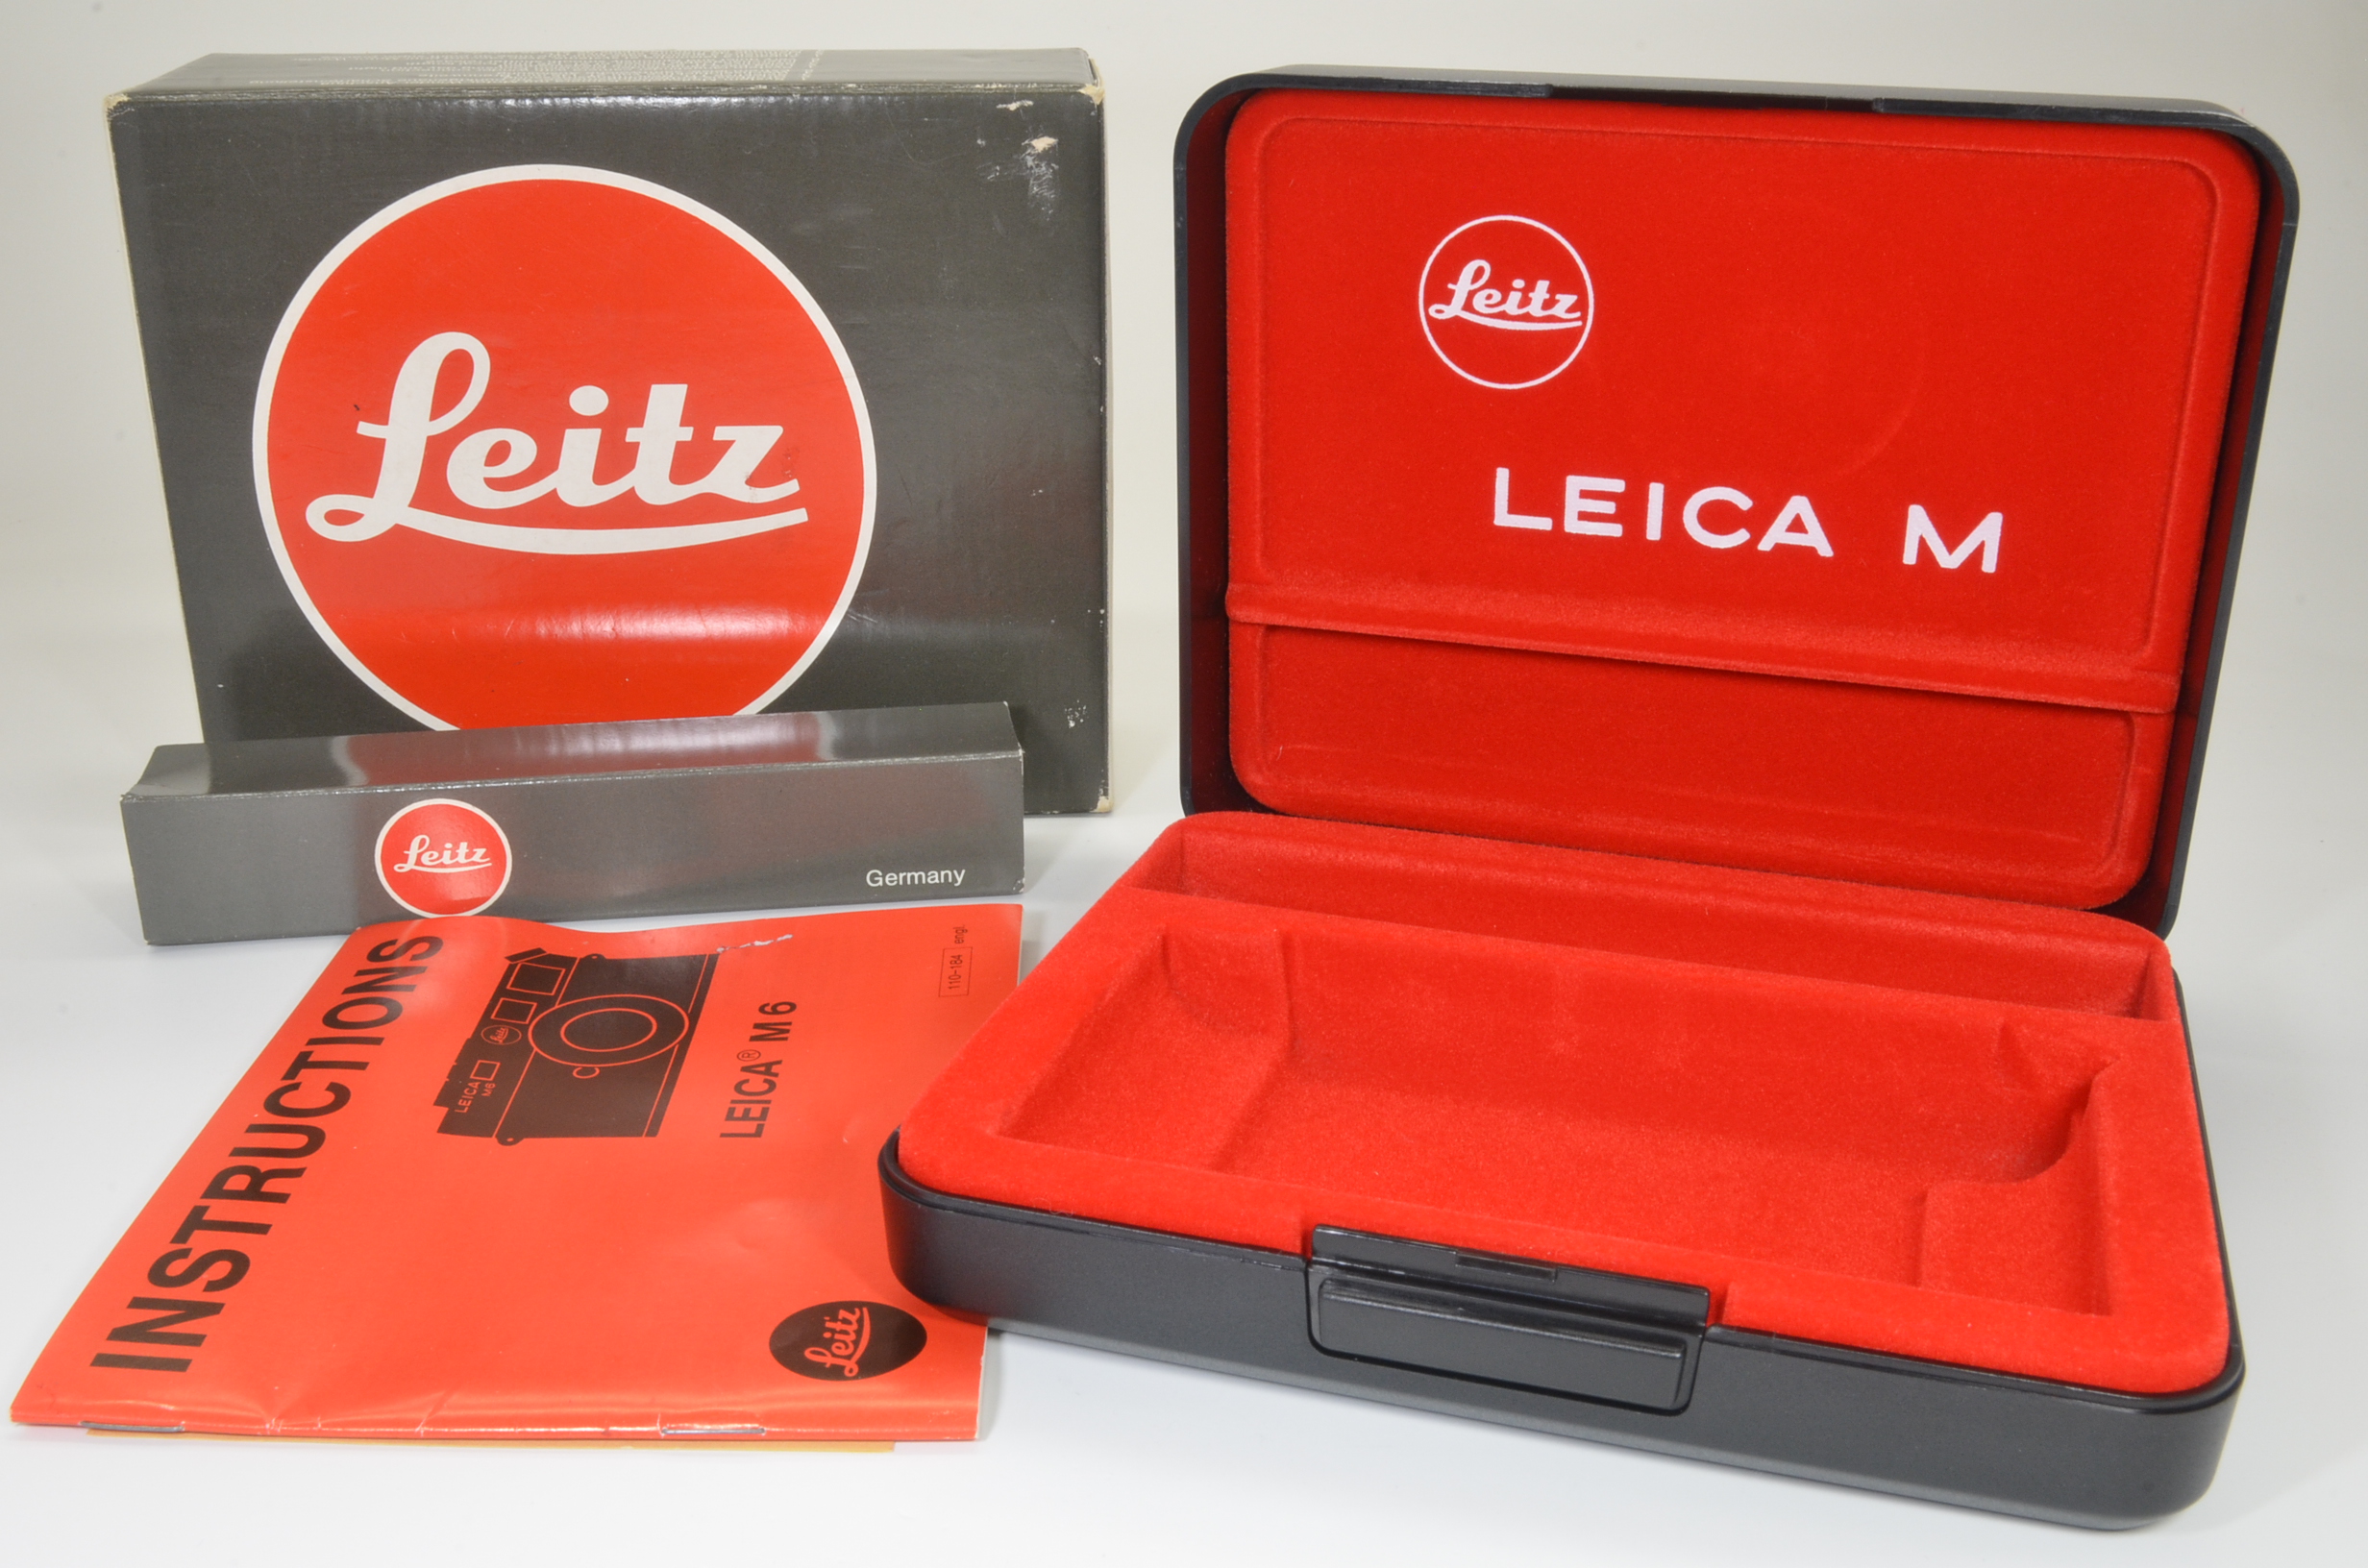 leica m6 empty box, plastic case, and english instructions